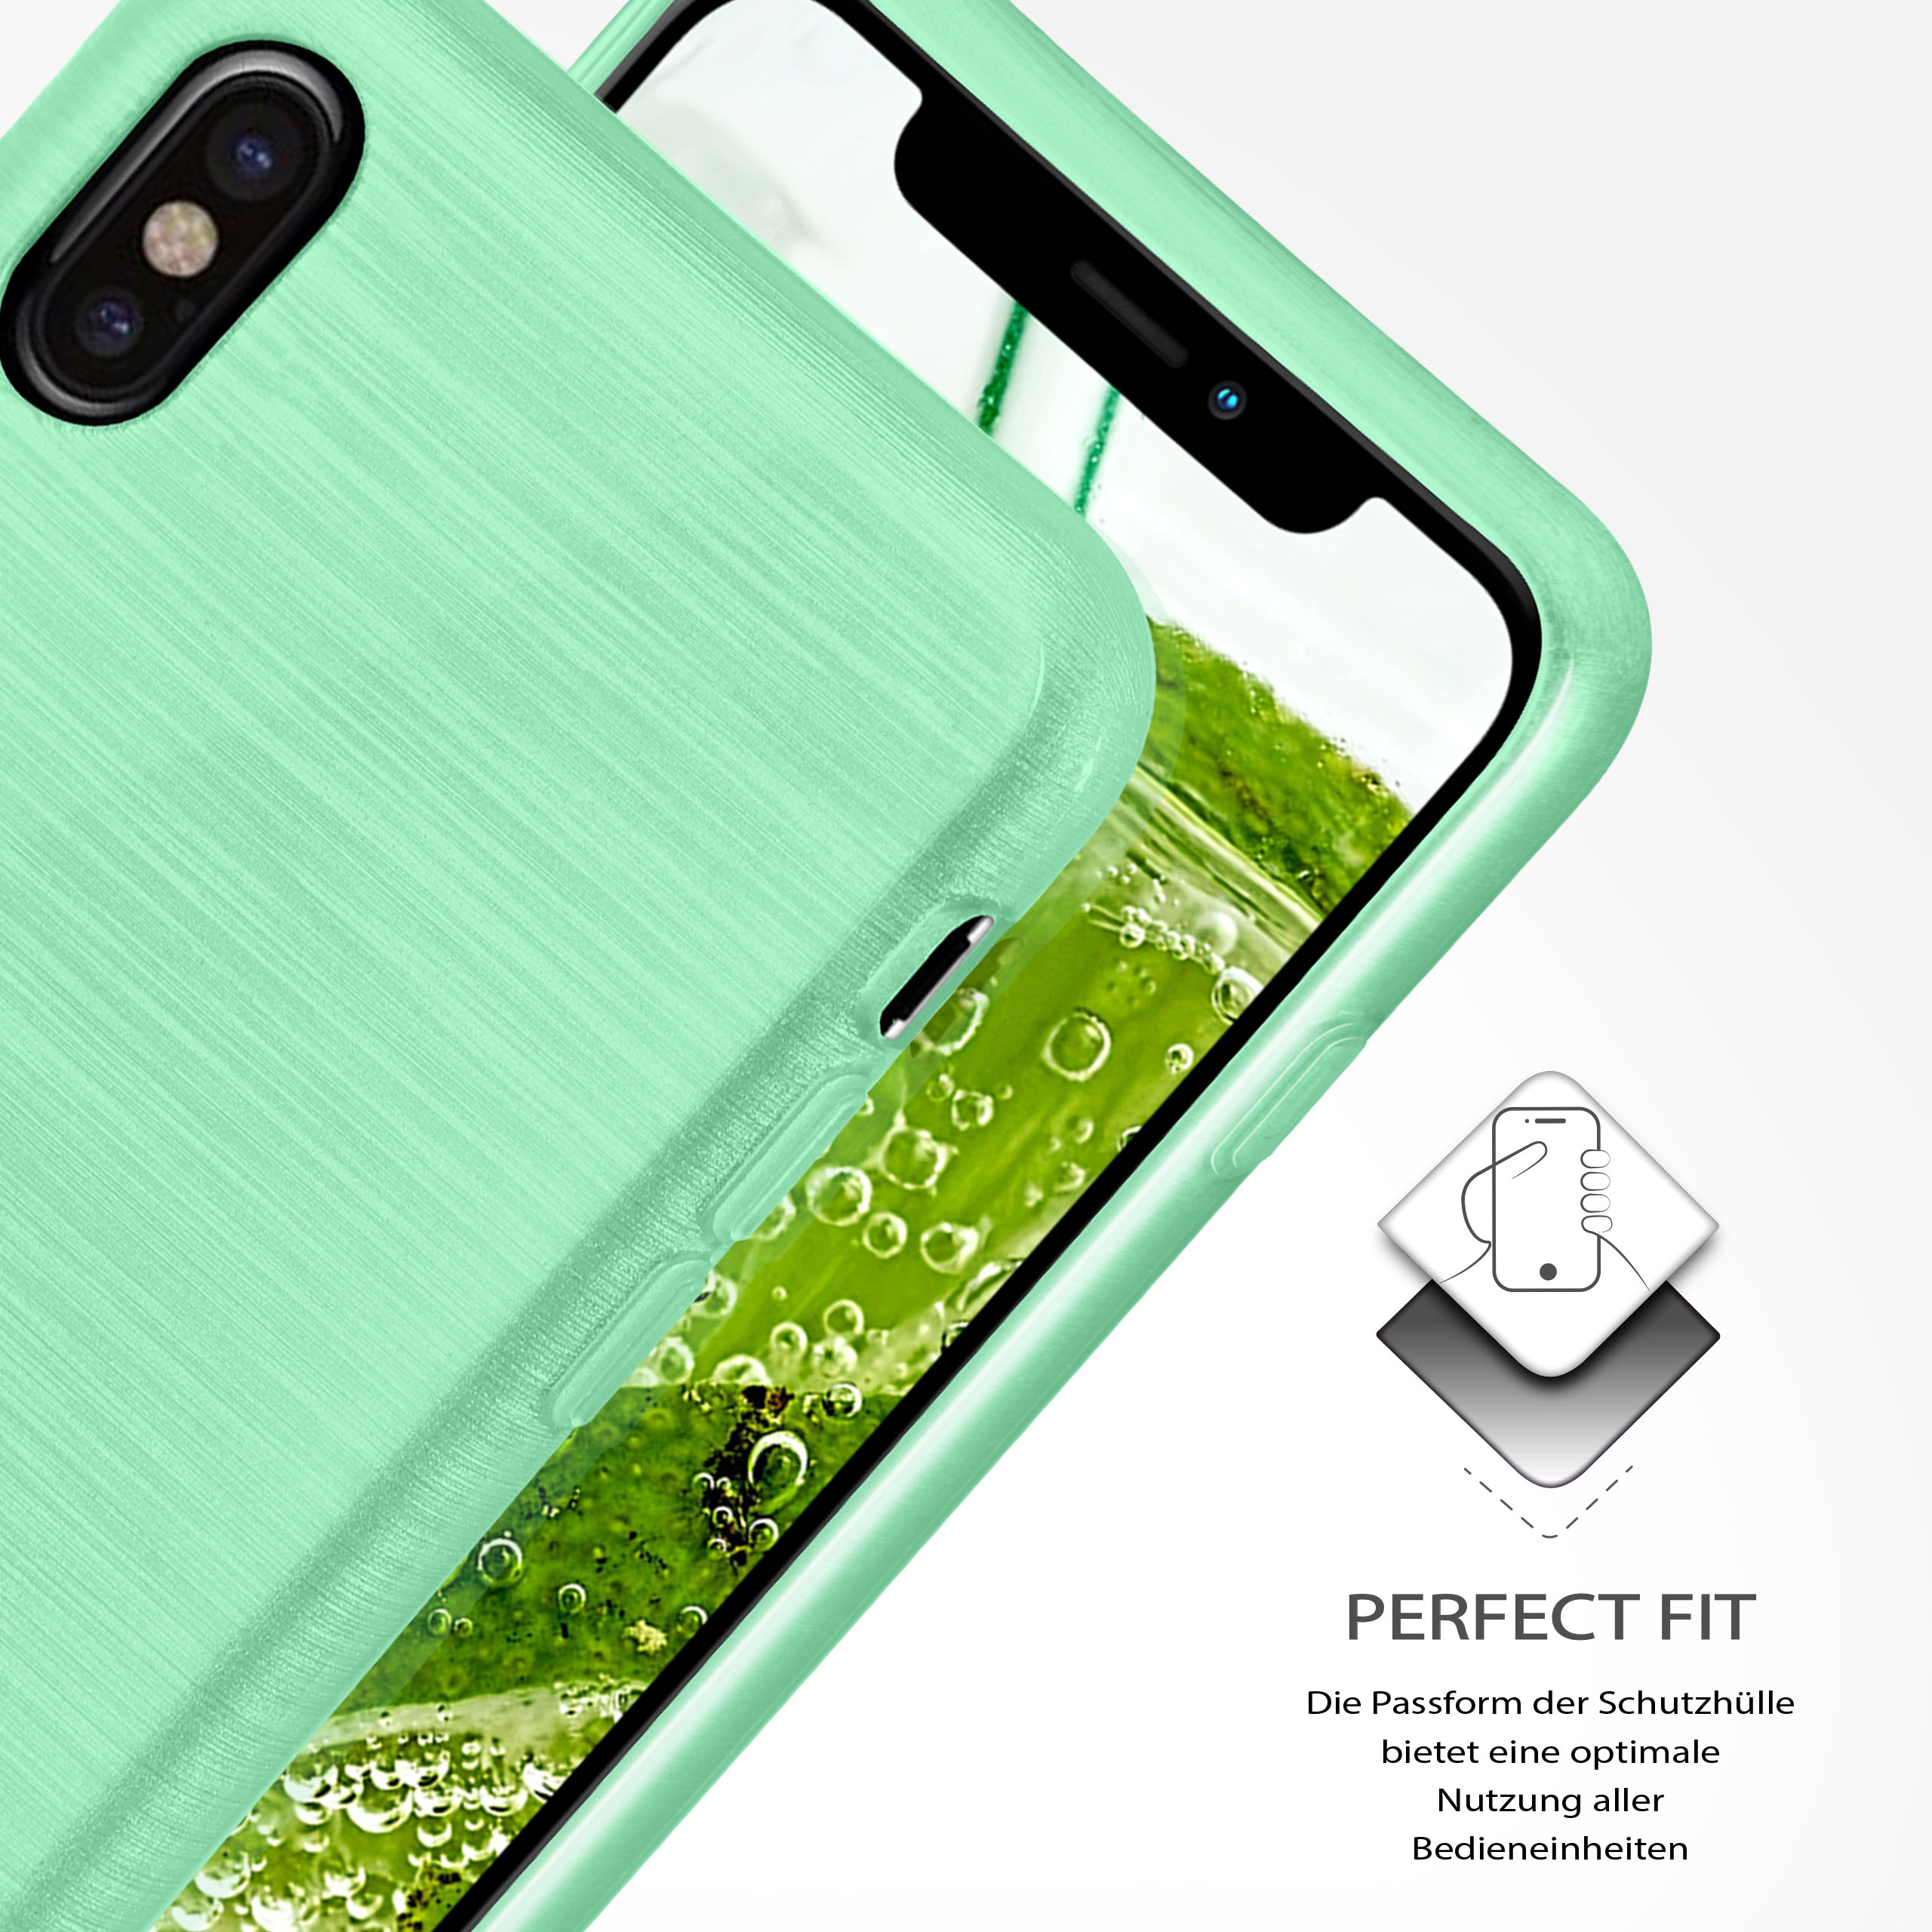 Backcover, Brushed MOEX XS, iPhone X Case, Apple, iPhone Mint-Green /